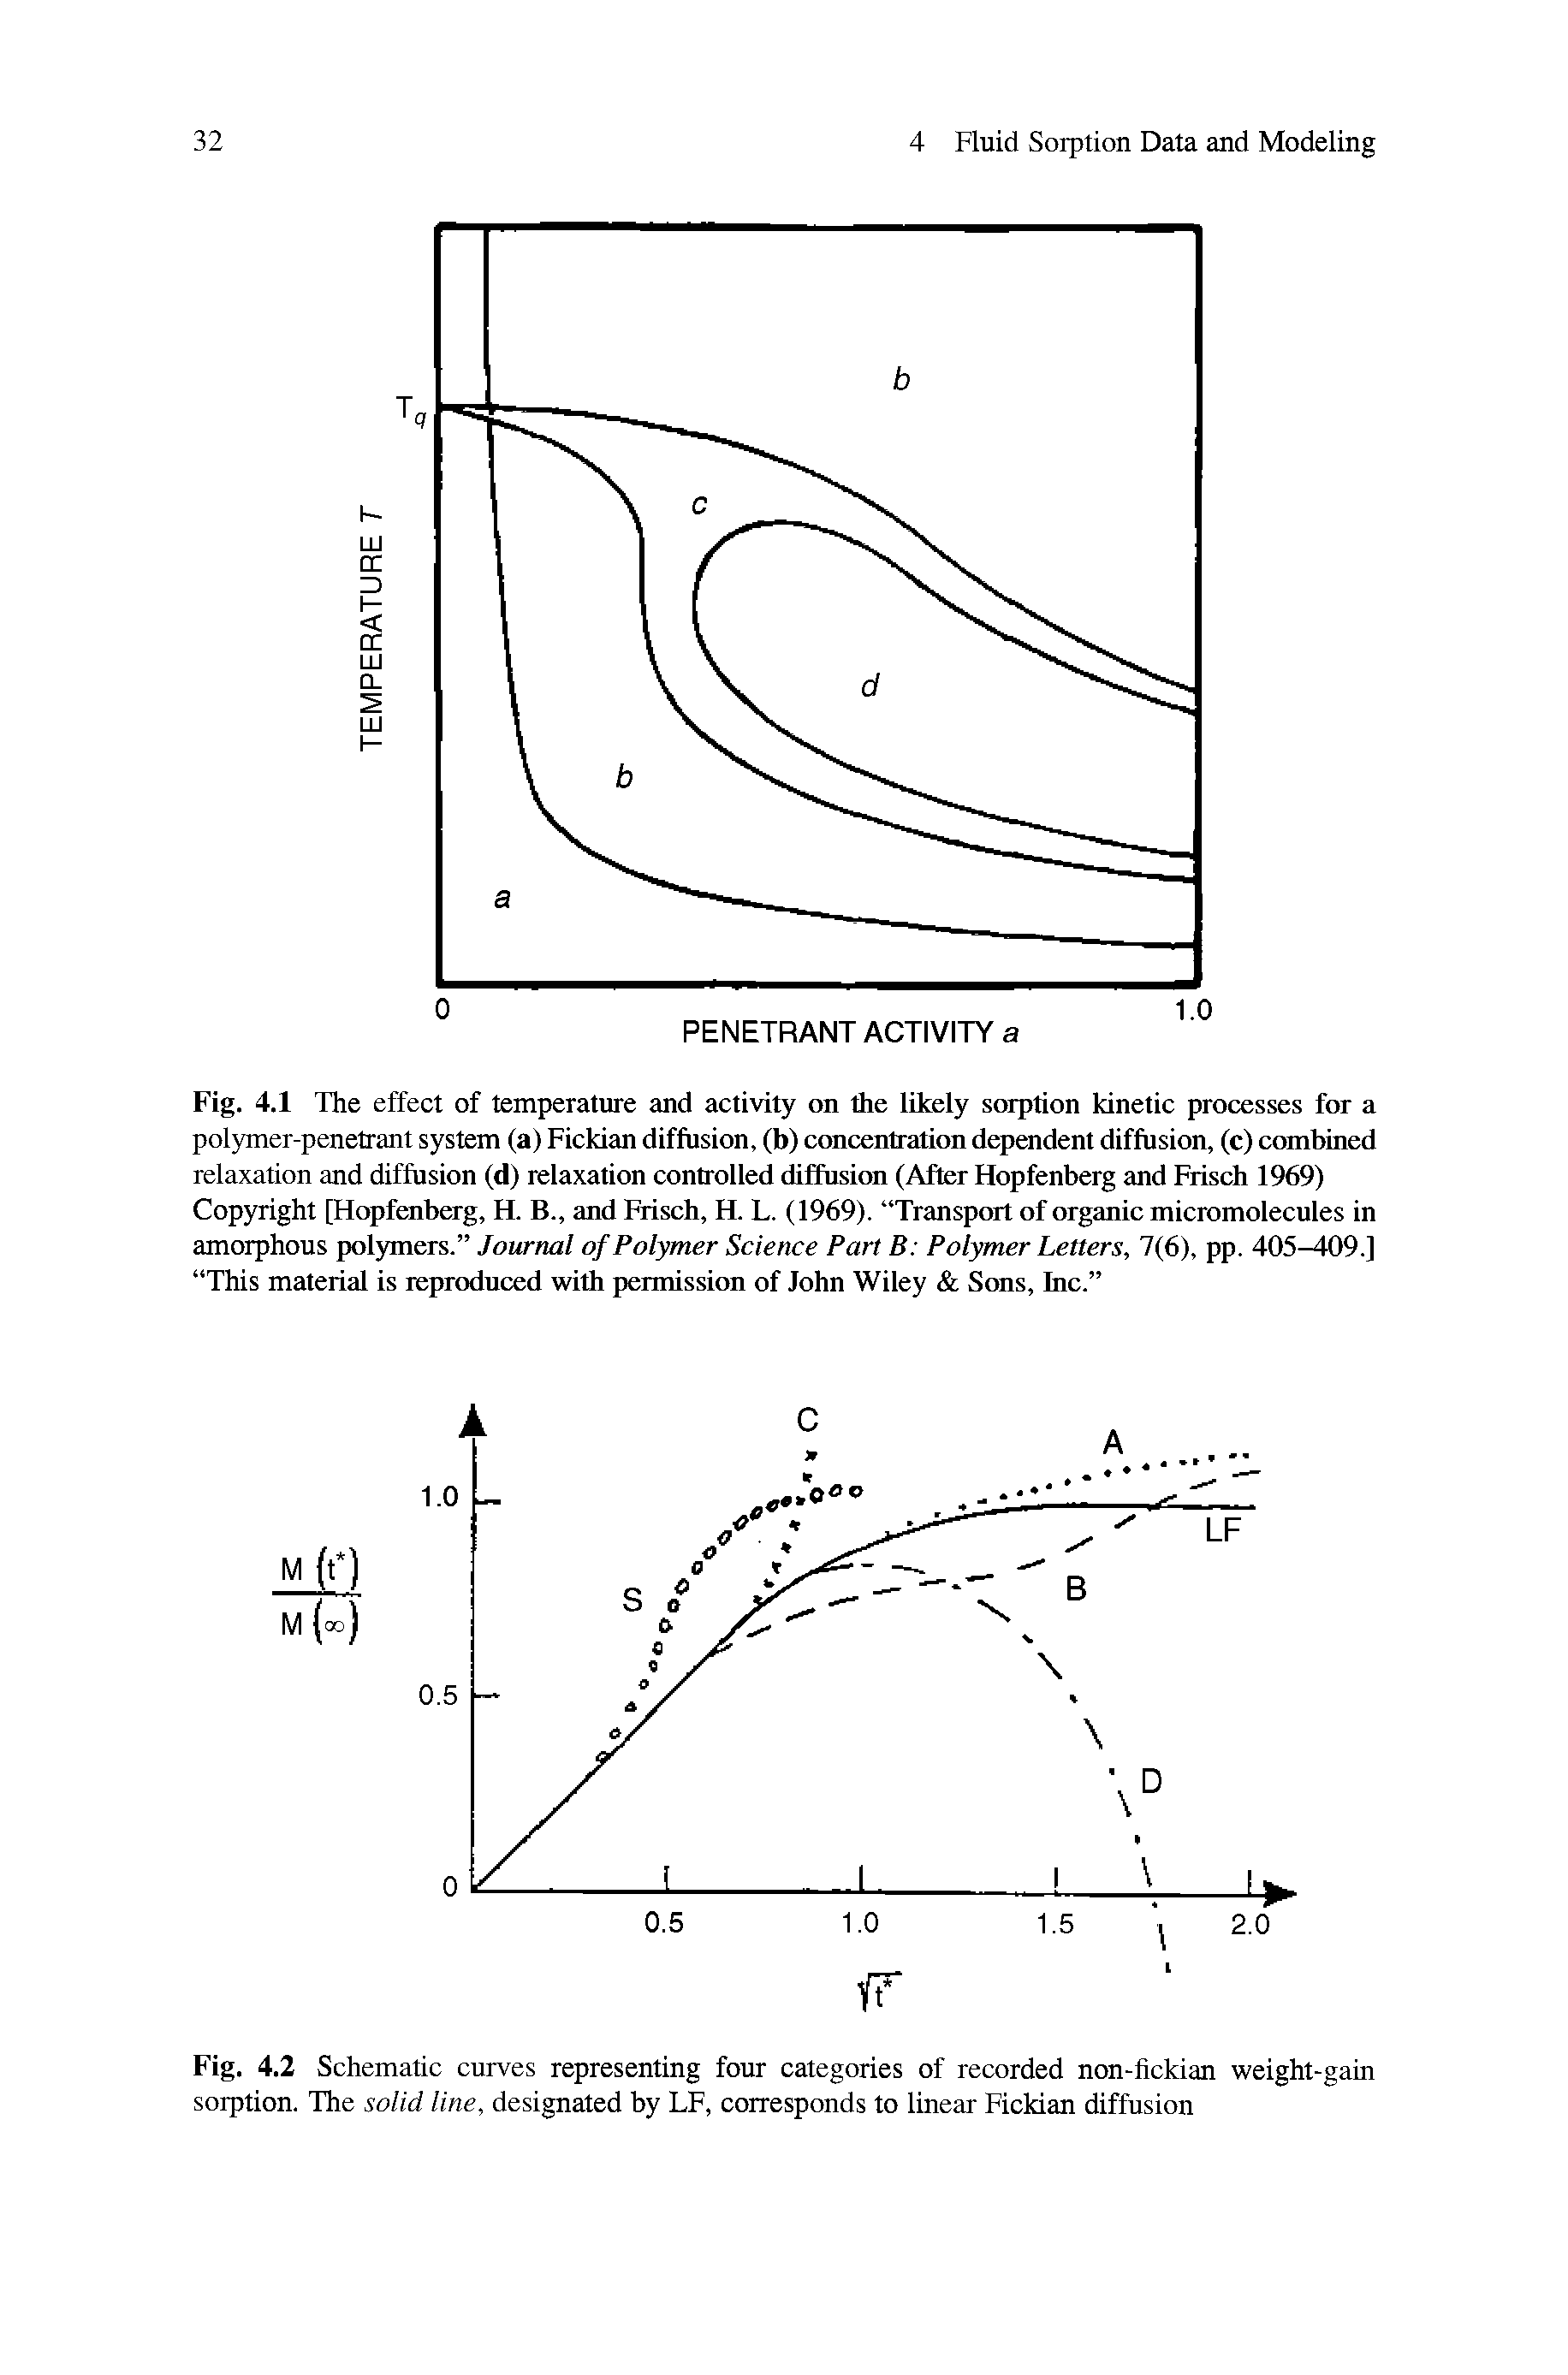 Fig. 4.1 The effect of temperature and activity on the likely sorption kinetic processes for a polymer-penetrant system (a) Fickian diffusion, (b) concentration dependent diffusion, (c) cranbined relaxation and diffusion (d) relaxation controlled diffusion (After Hopfenberg and Frisch 1969) Copyright [Hopfenberg, H. B., and Frisch, H. L. (1969). TranspOTt of organic micromolecules in amorphous polymers. Journal of Polymer Science Pan B Polymer Letters, 7(6), pp. 405-409.] This material is reproduced with permission of John Wiley Smis, Inc. ...